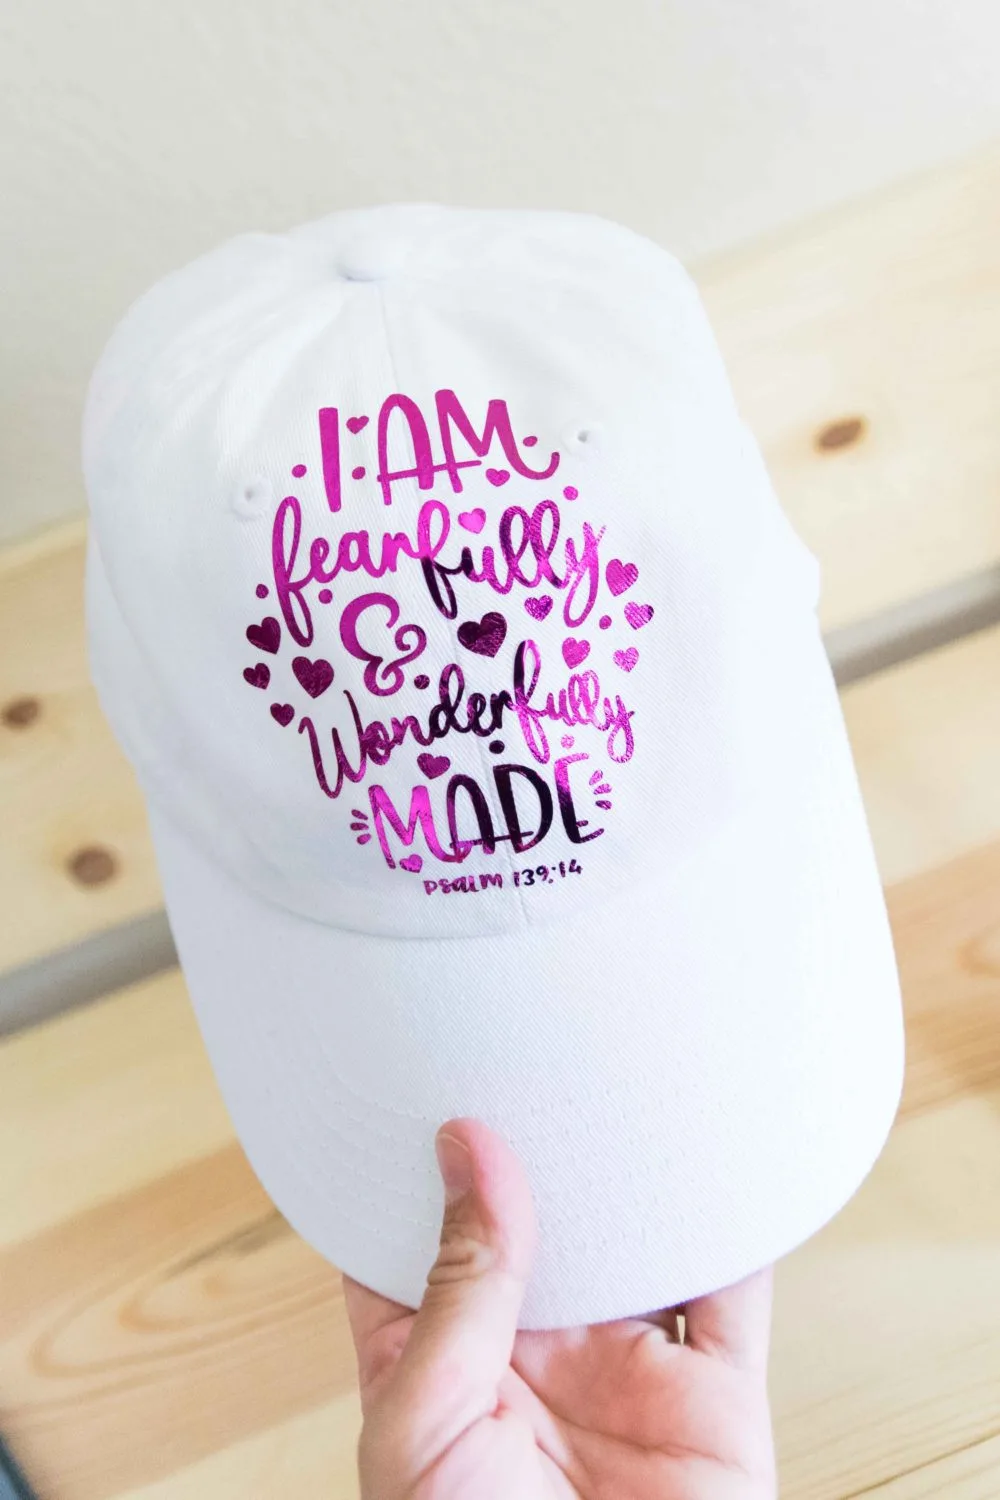 Hat made with the Cricut Easypress Mini